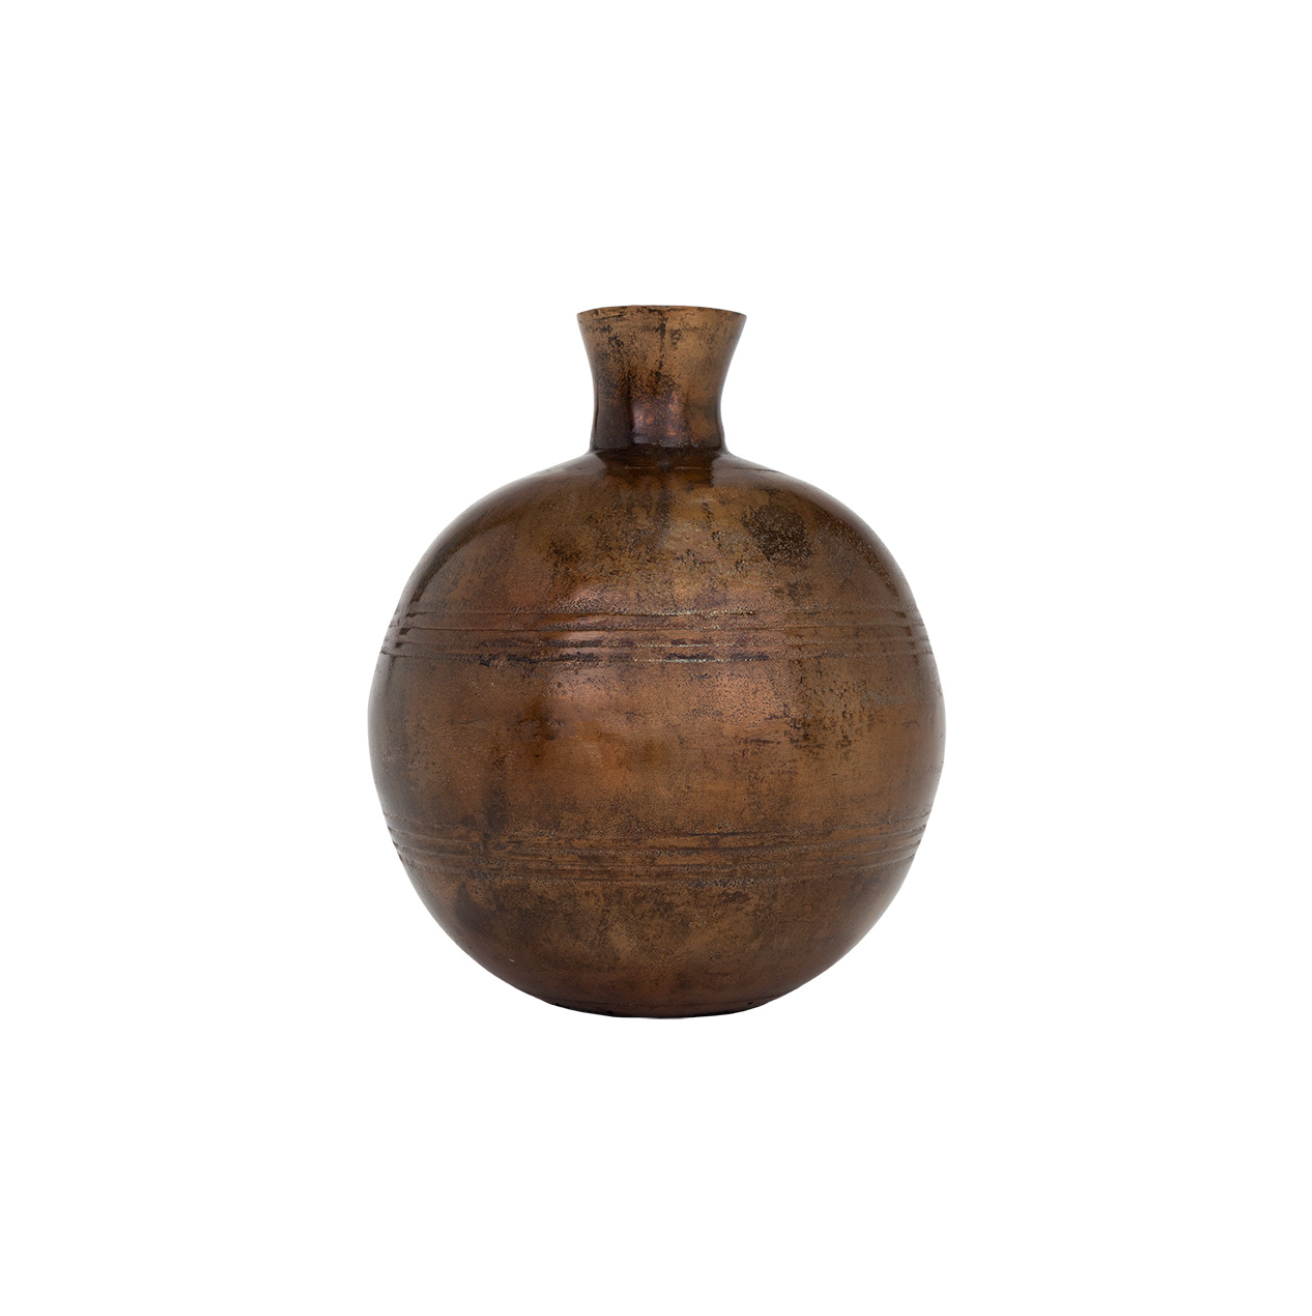 A round ceramic Jaques M vase with a narrow neck, displaying an earthy brown color and subtle textured patterns, evoking the style of a Scottsdale Arizona bungalow, isolated on a white background by The Import Collection.